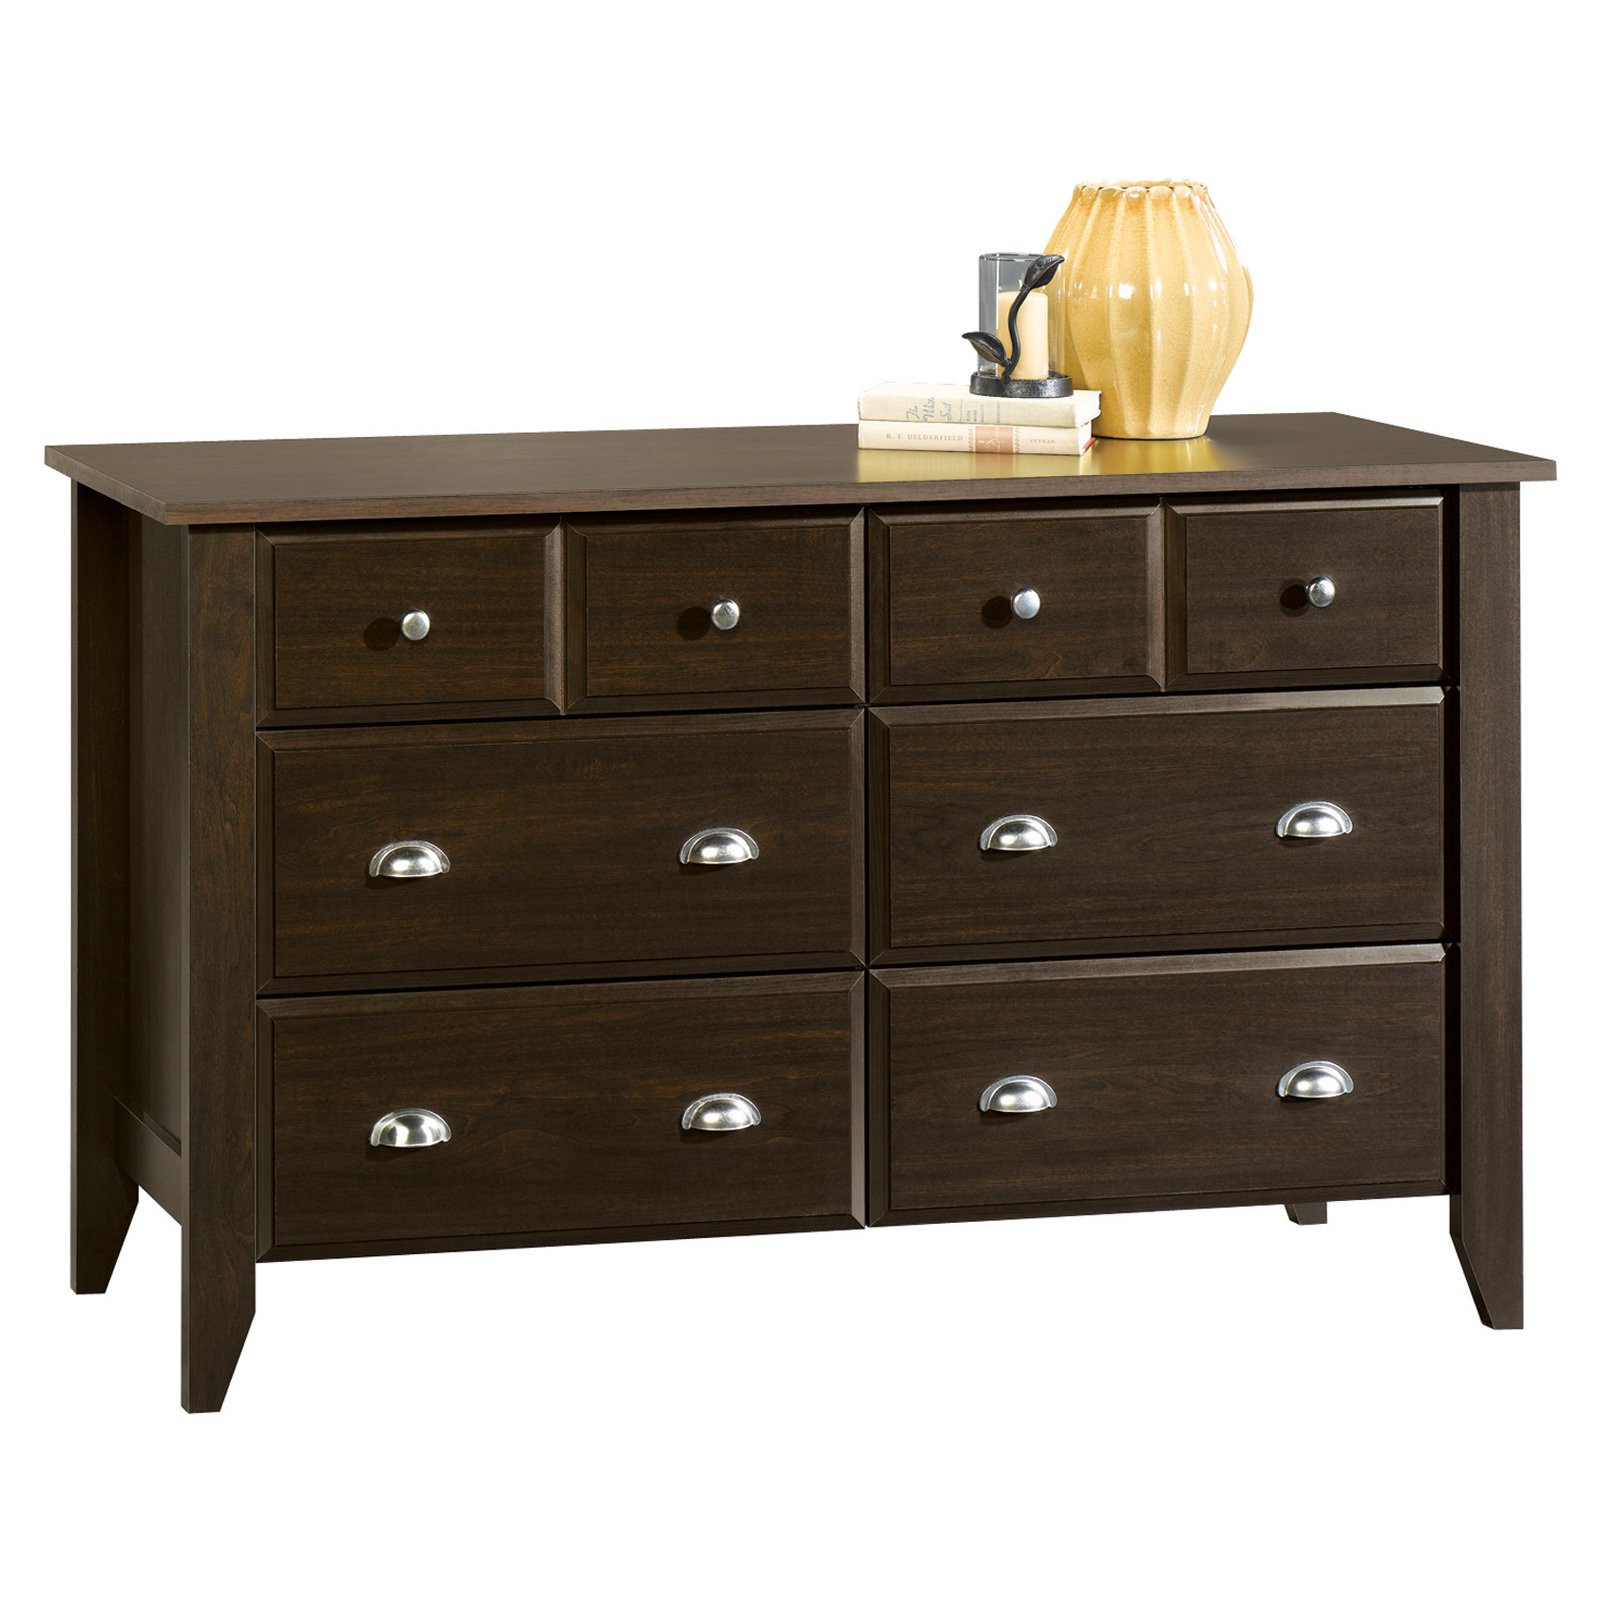 Child Craft Dressers
 Child Craft Relaxed Traditional Double Dresser Jamocha